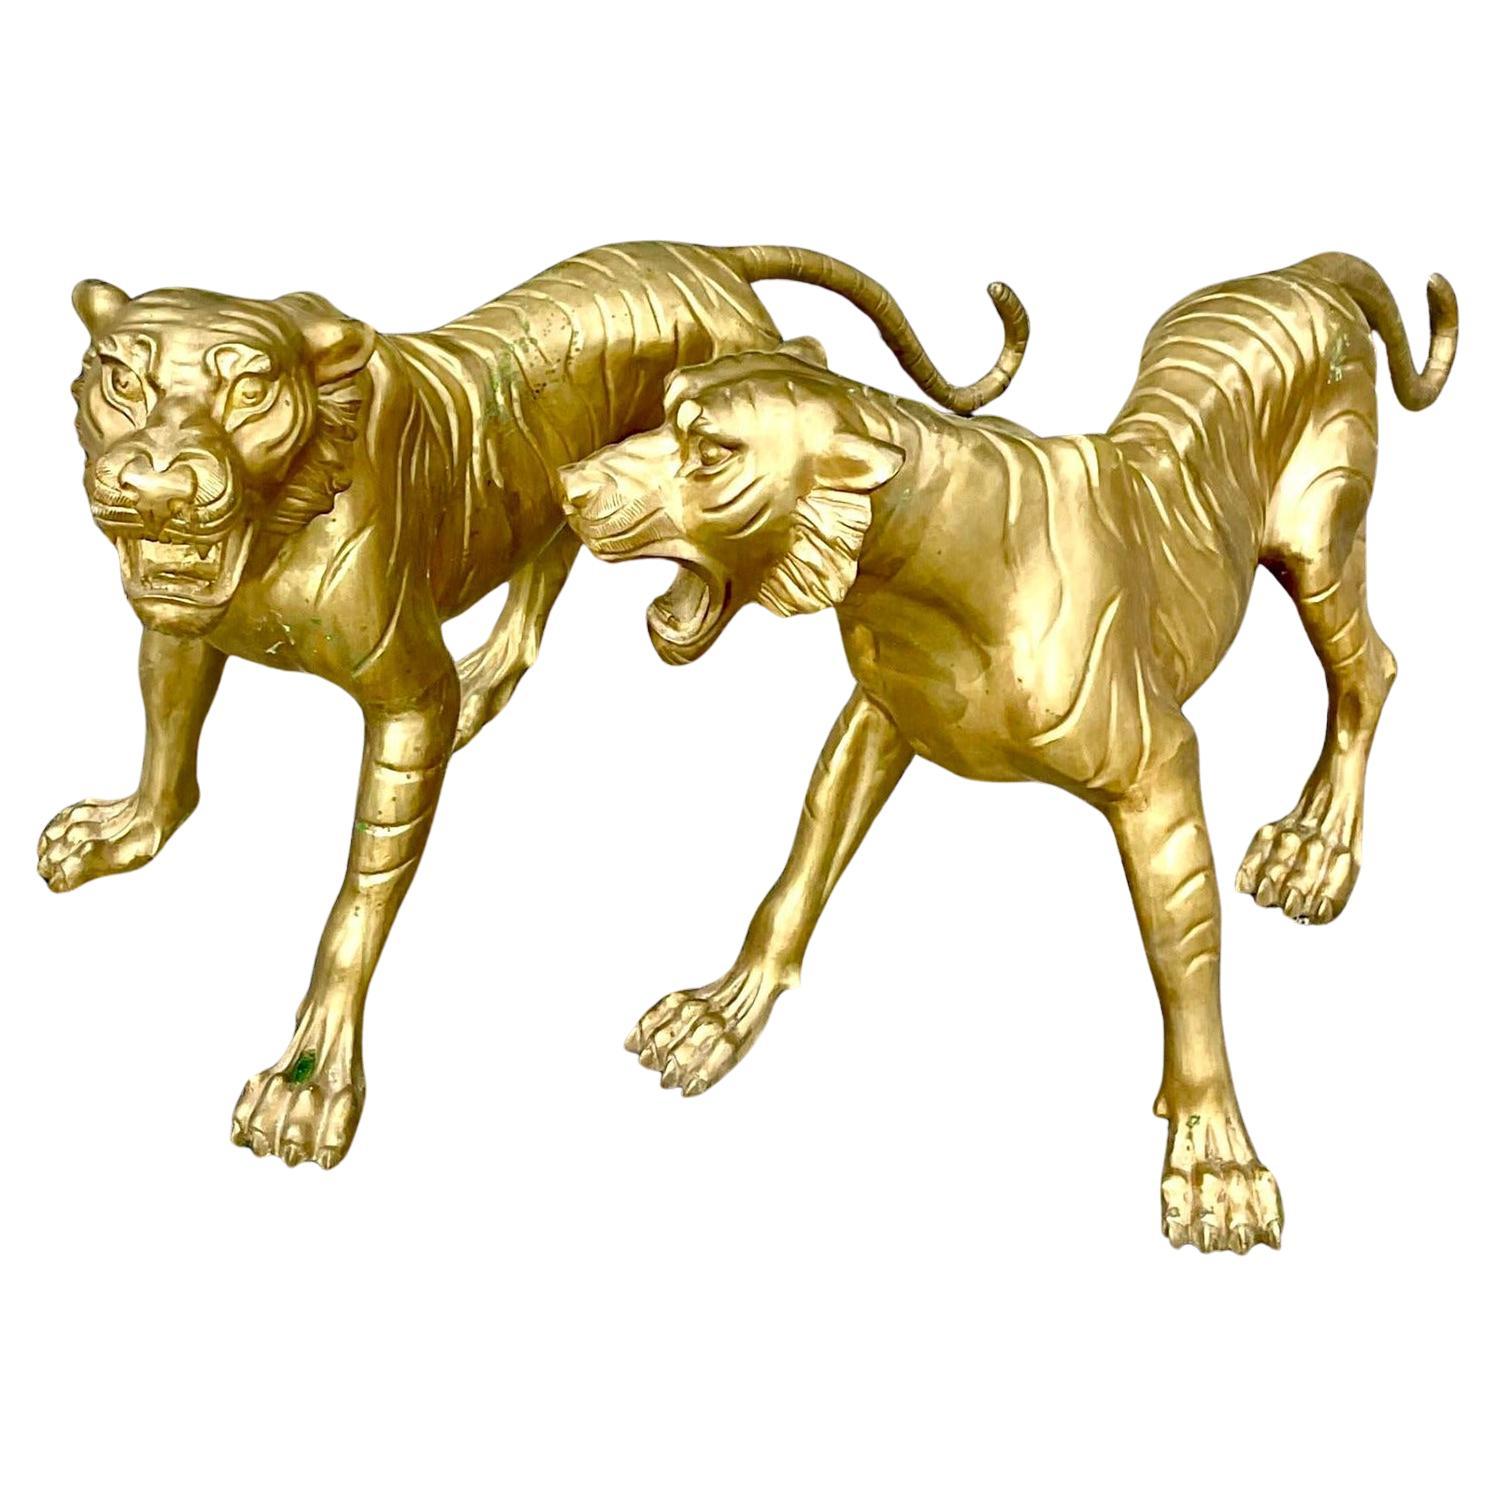 Vintage Regency Life Size Brass Tigers - a Pair For Sale